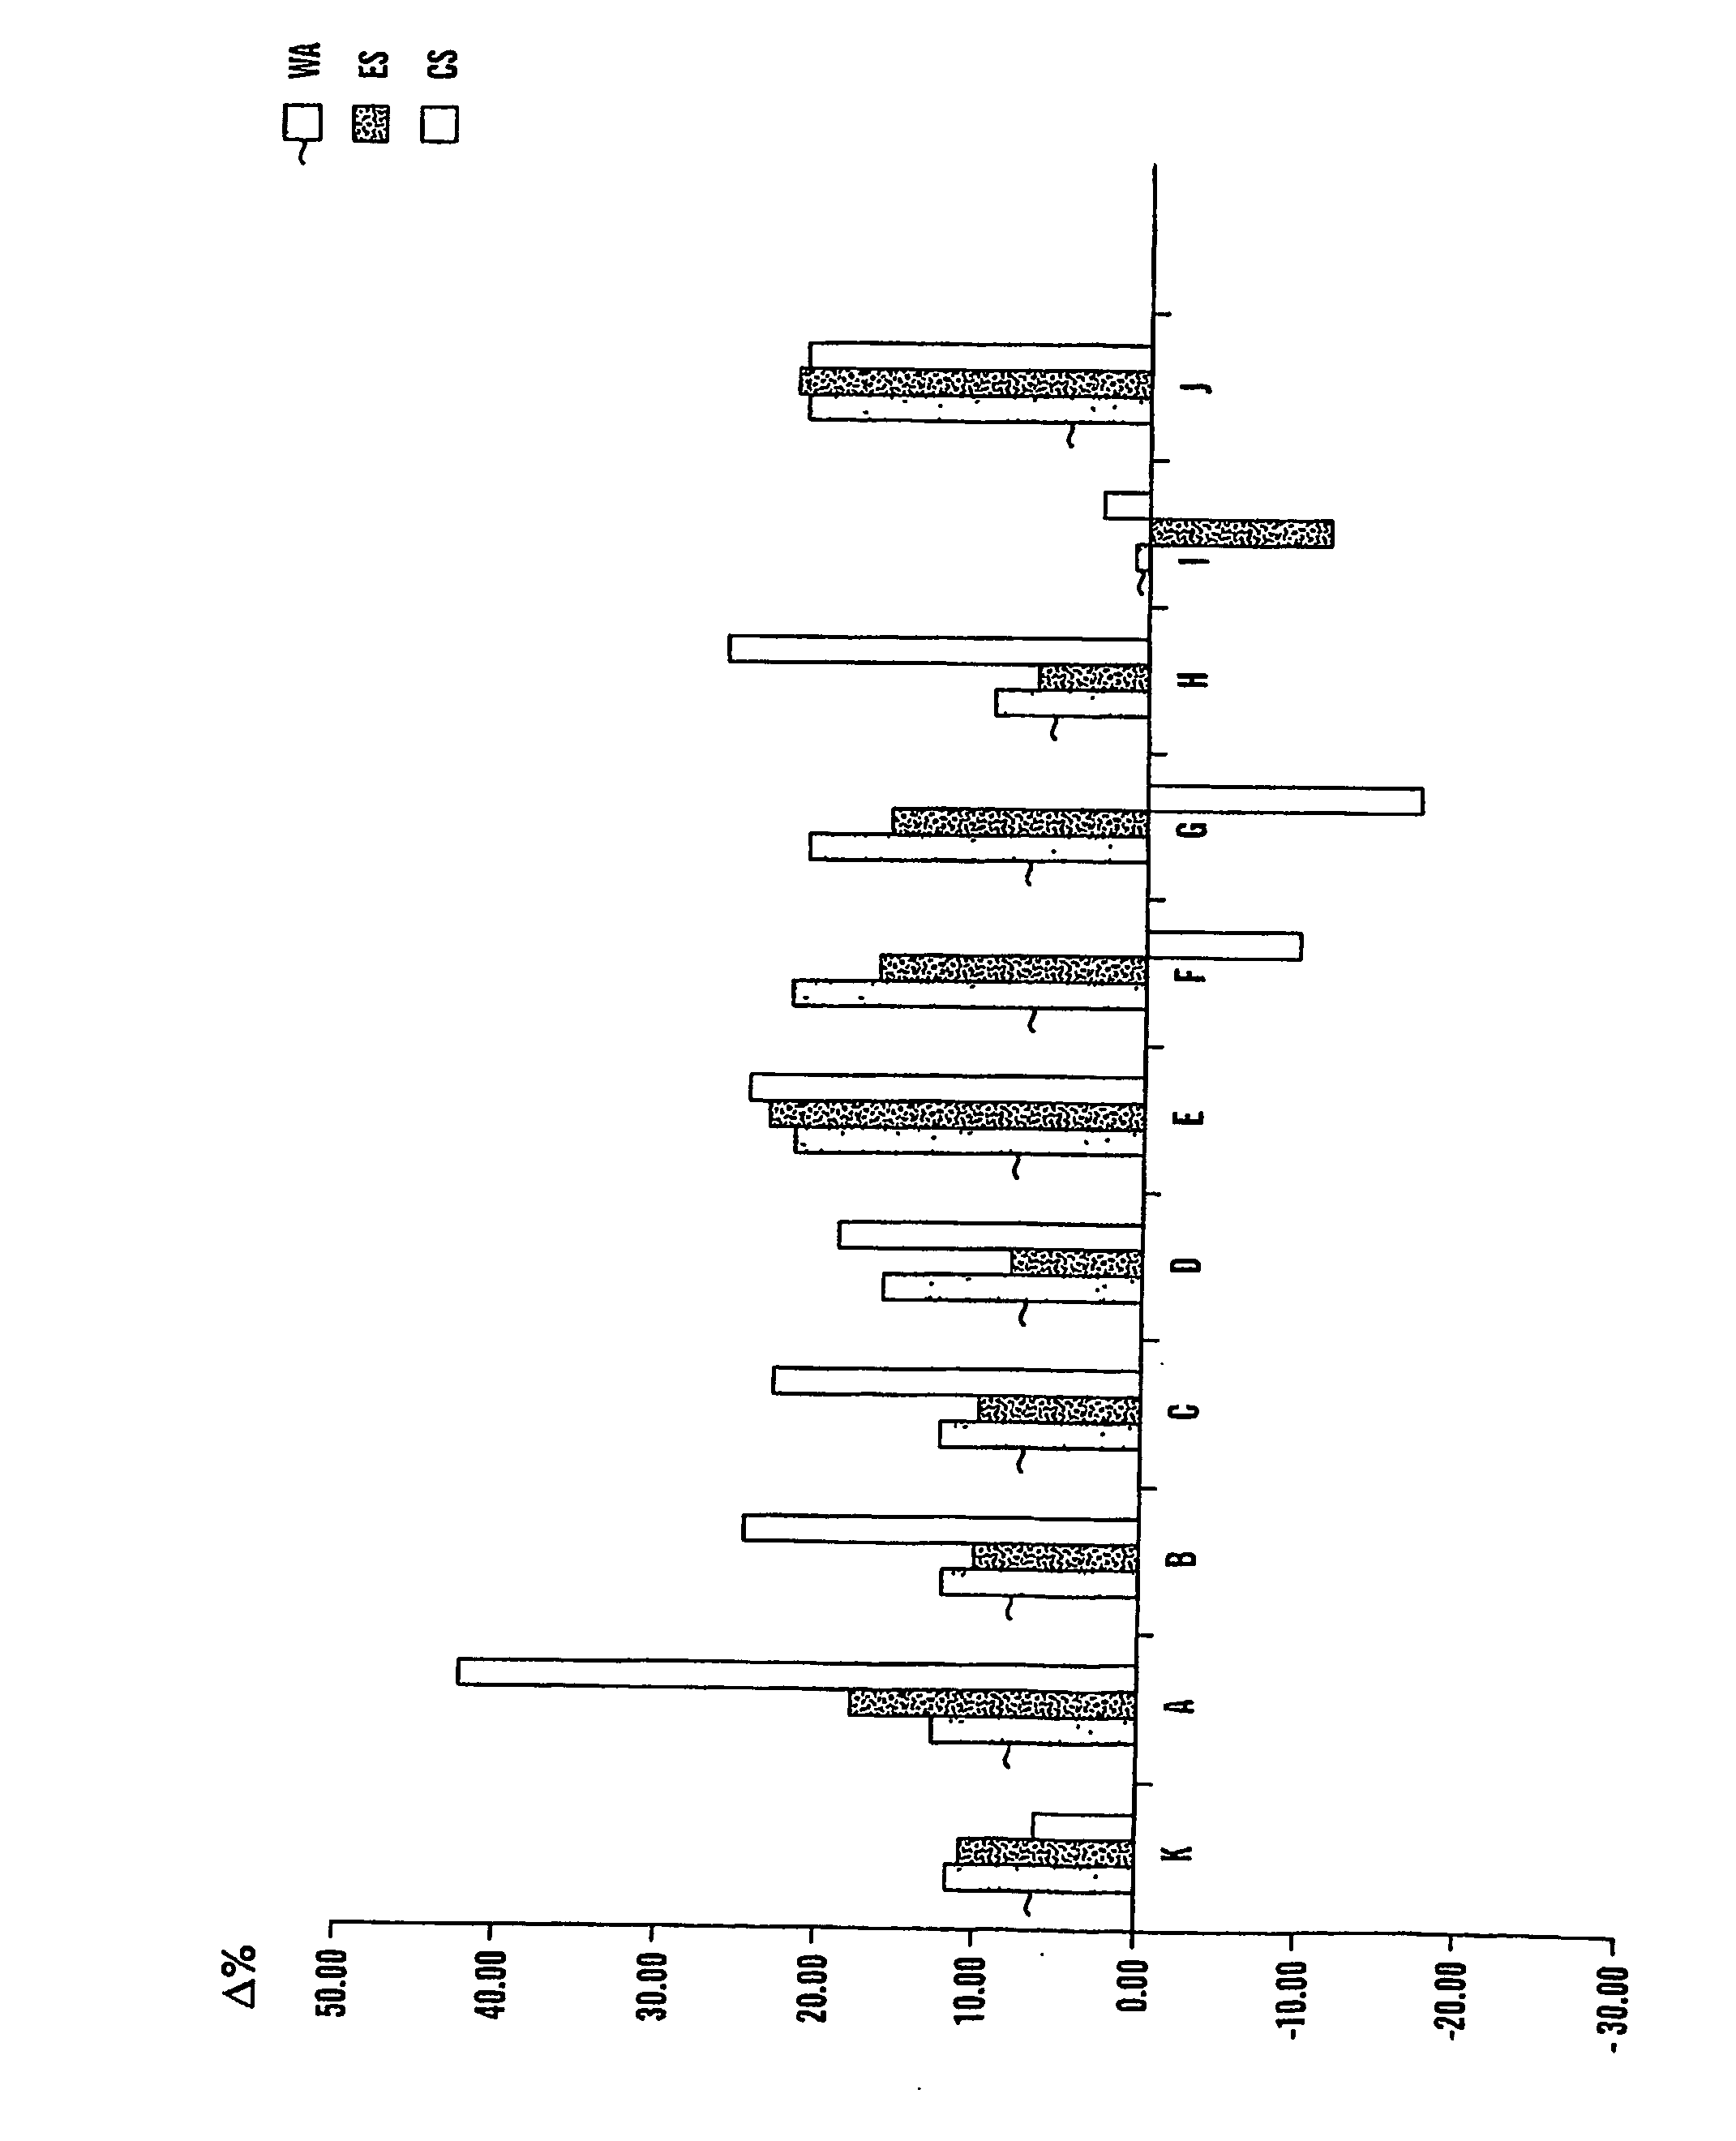 Emulsions for lignocellulosic products, methods of their manufacture, improved lignocellulosic products and methods for their manufacuture